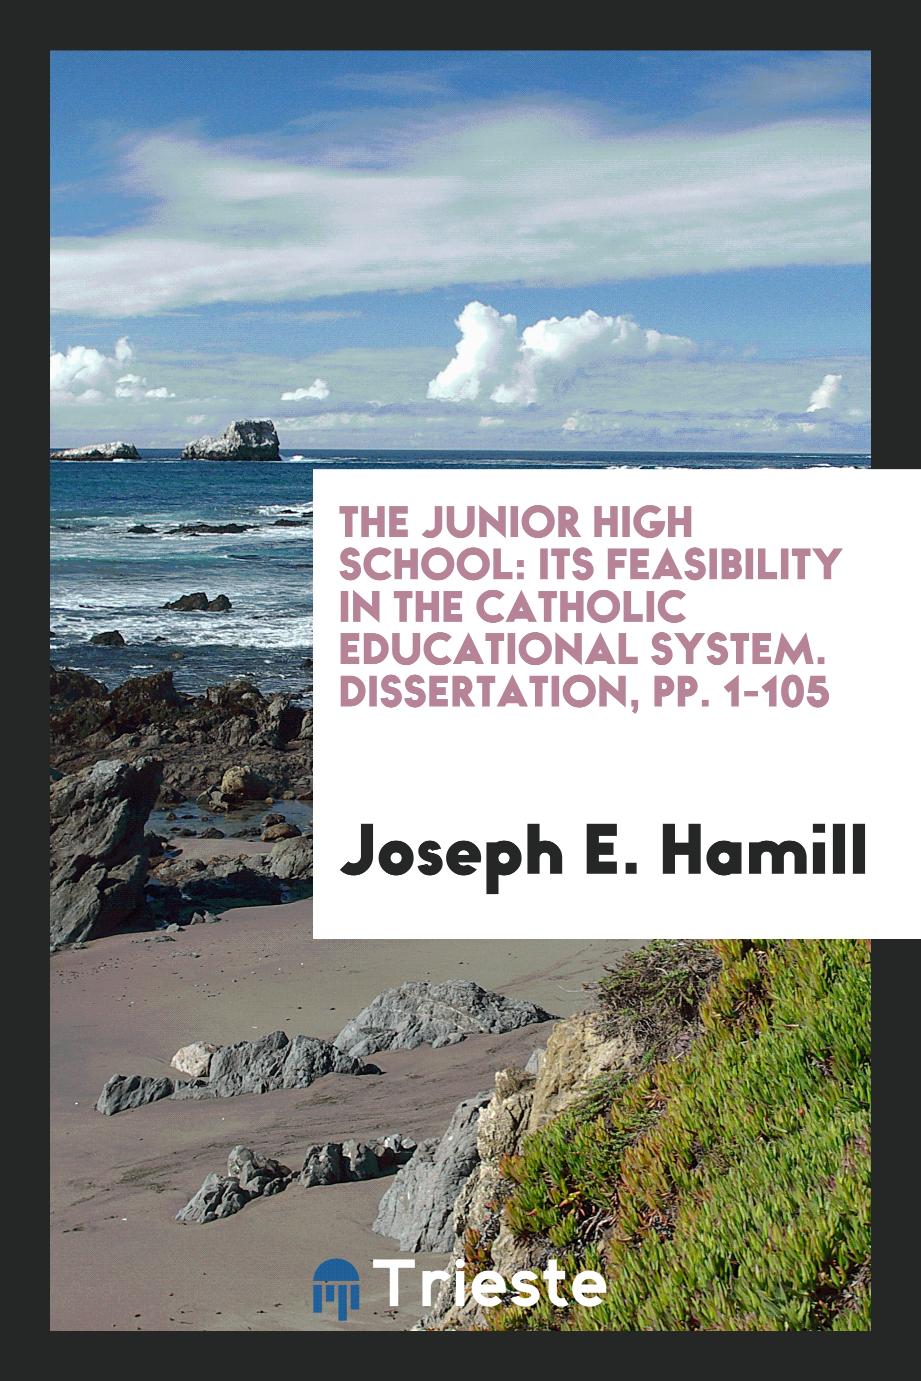 The Junior High School: Its Feasibility in the Catholic Educational System. Dissertation, pp. 1-105